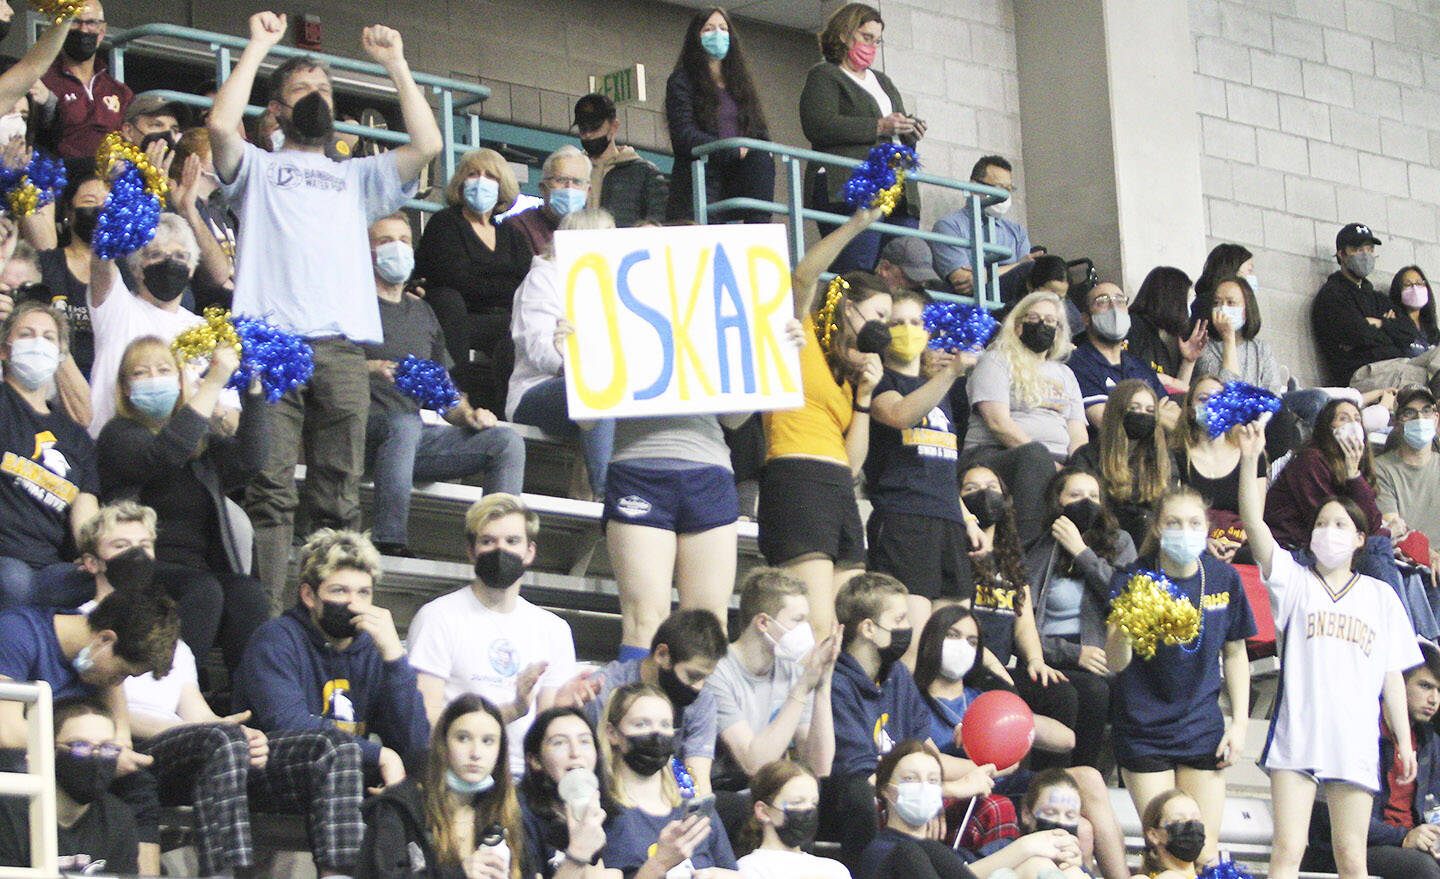 A good-sized crowd from Bainbridge Island cheers on the Spartan swimmers.